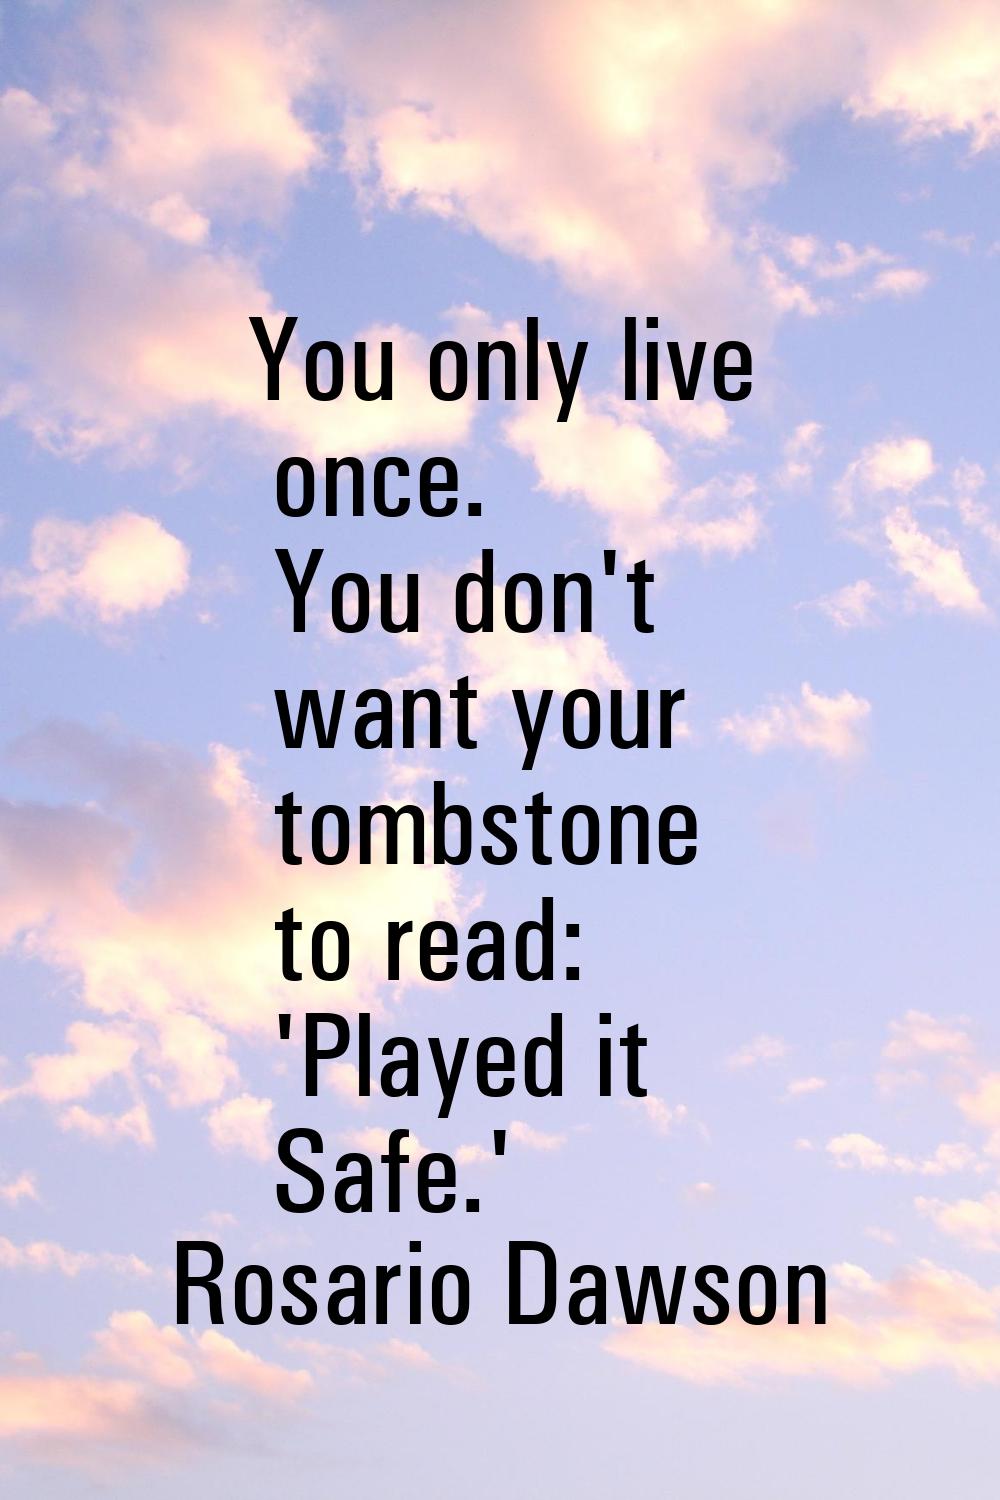 You only live once. You don't want your tombstone to read: 'Played it Safe.'